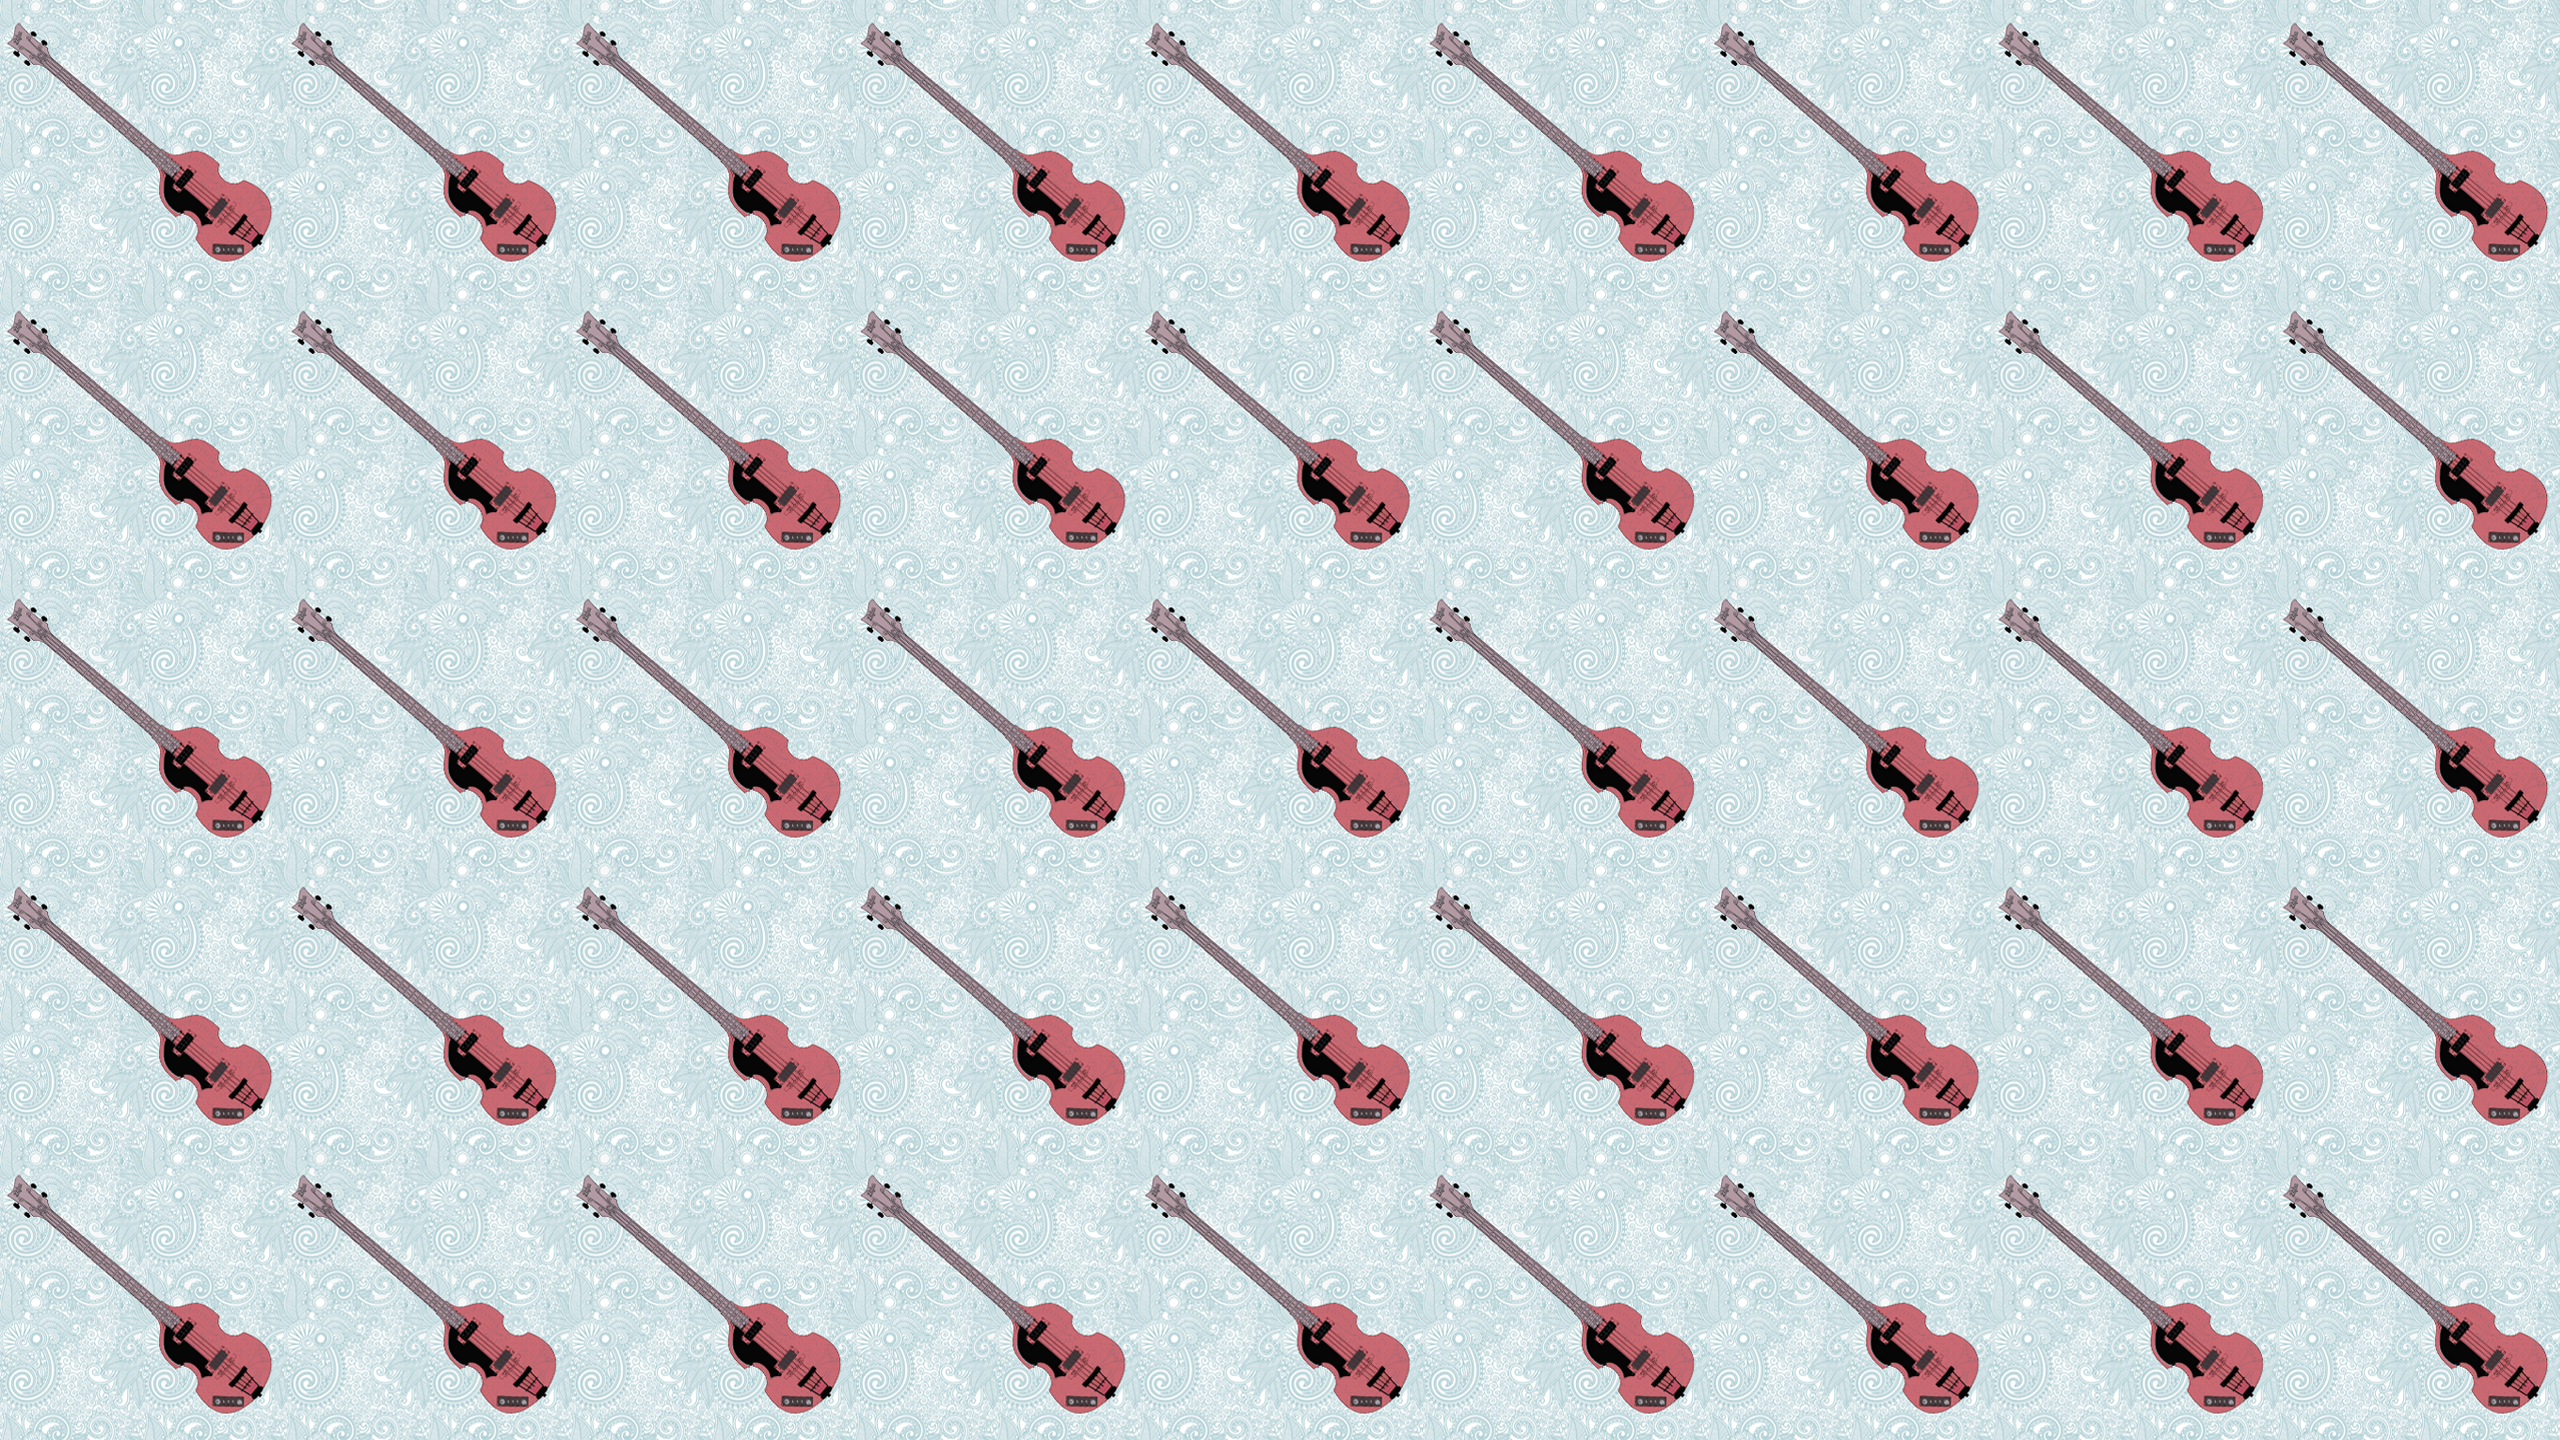 This Bass Guitar Desktop Wallpaper Is Easy Just Save The